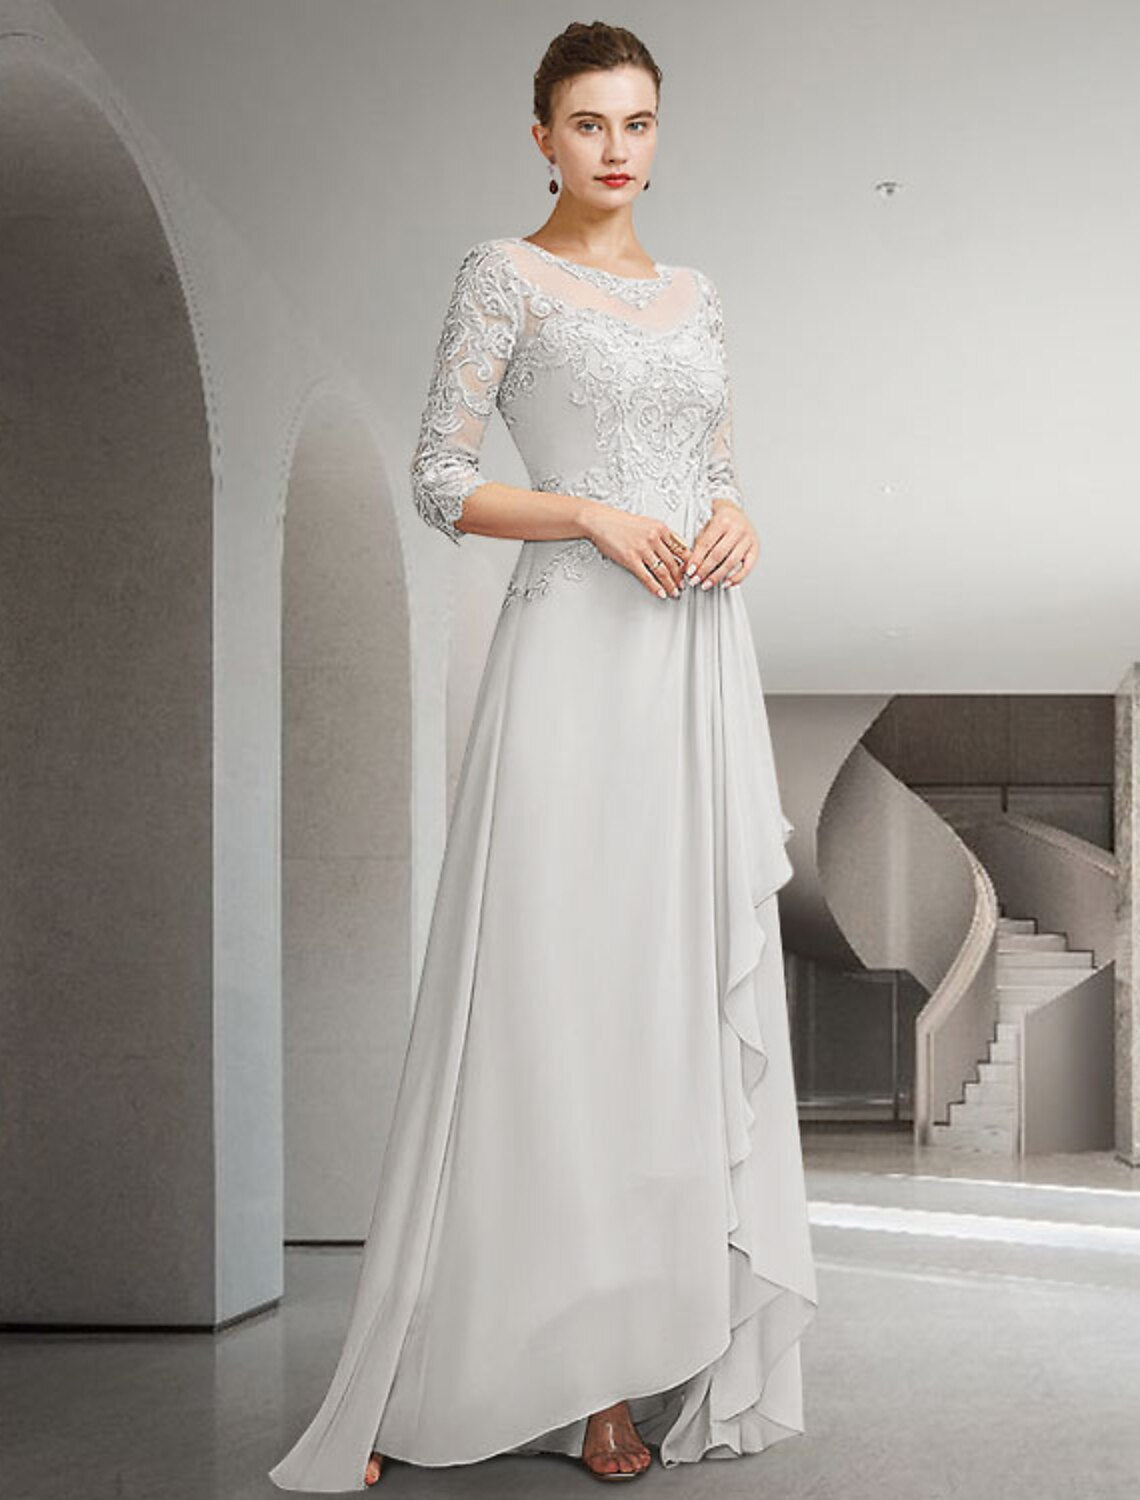 A-Line Mother of the Bride Dress Elegant High Low Jewel Neck Sweep / Brush Train Asymmetrical Chiffon Lace 3/4 Length Sleeve with Pleats Appliques